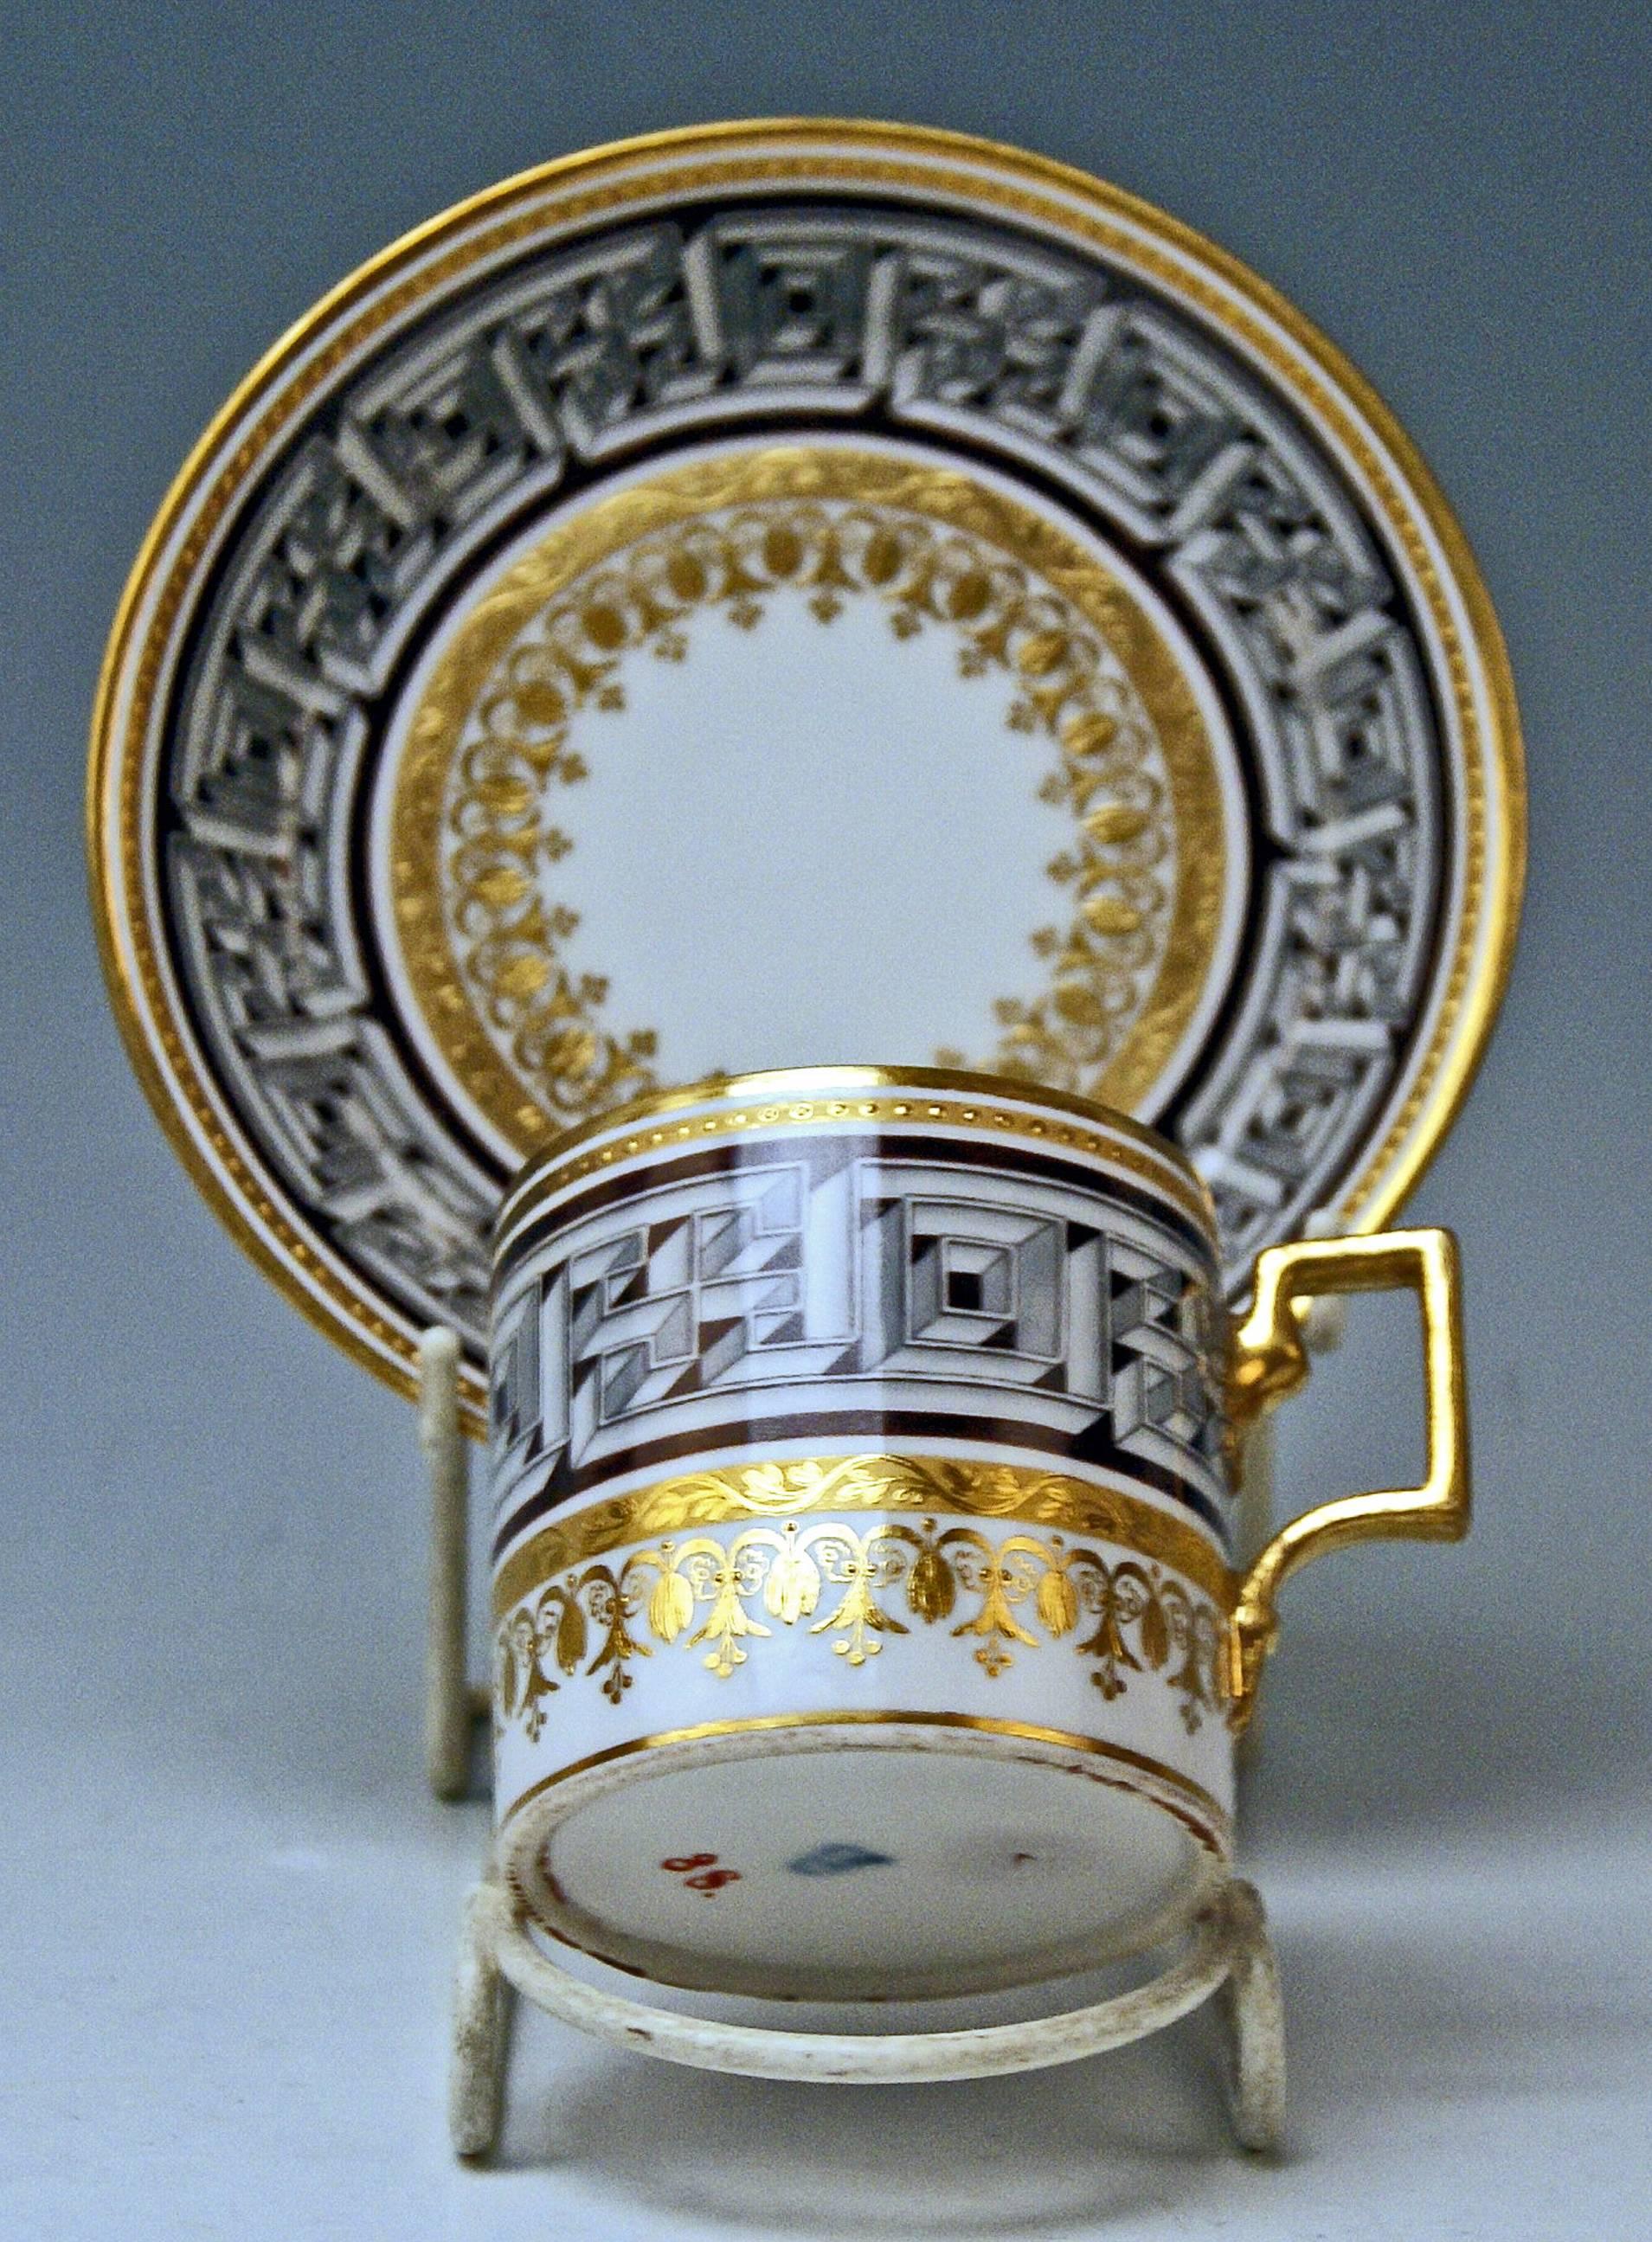 Cylindric cup with angular handle and saucer, both decorated with double meander ornaments.

Vienna / Old Imperial Austrian Porcelain Manufactory
(Alt Wien / Kaiserliche Porzellan Manufaktur)
dated 1800

Hallmarked:
FORMER's NUMBER